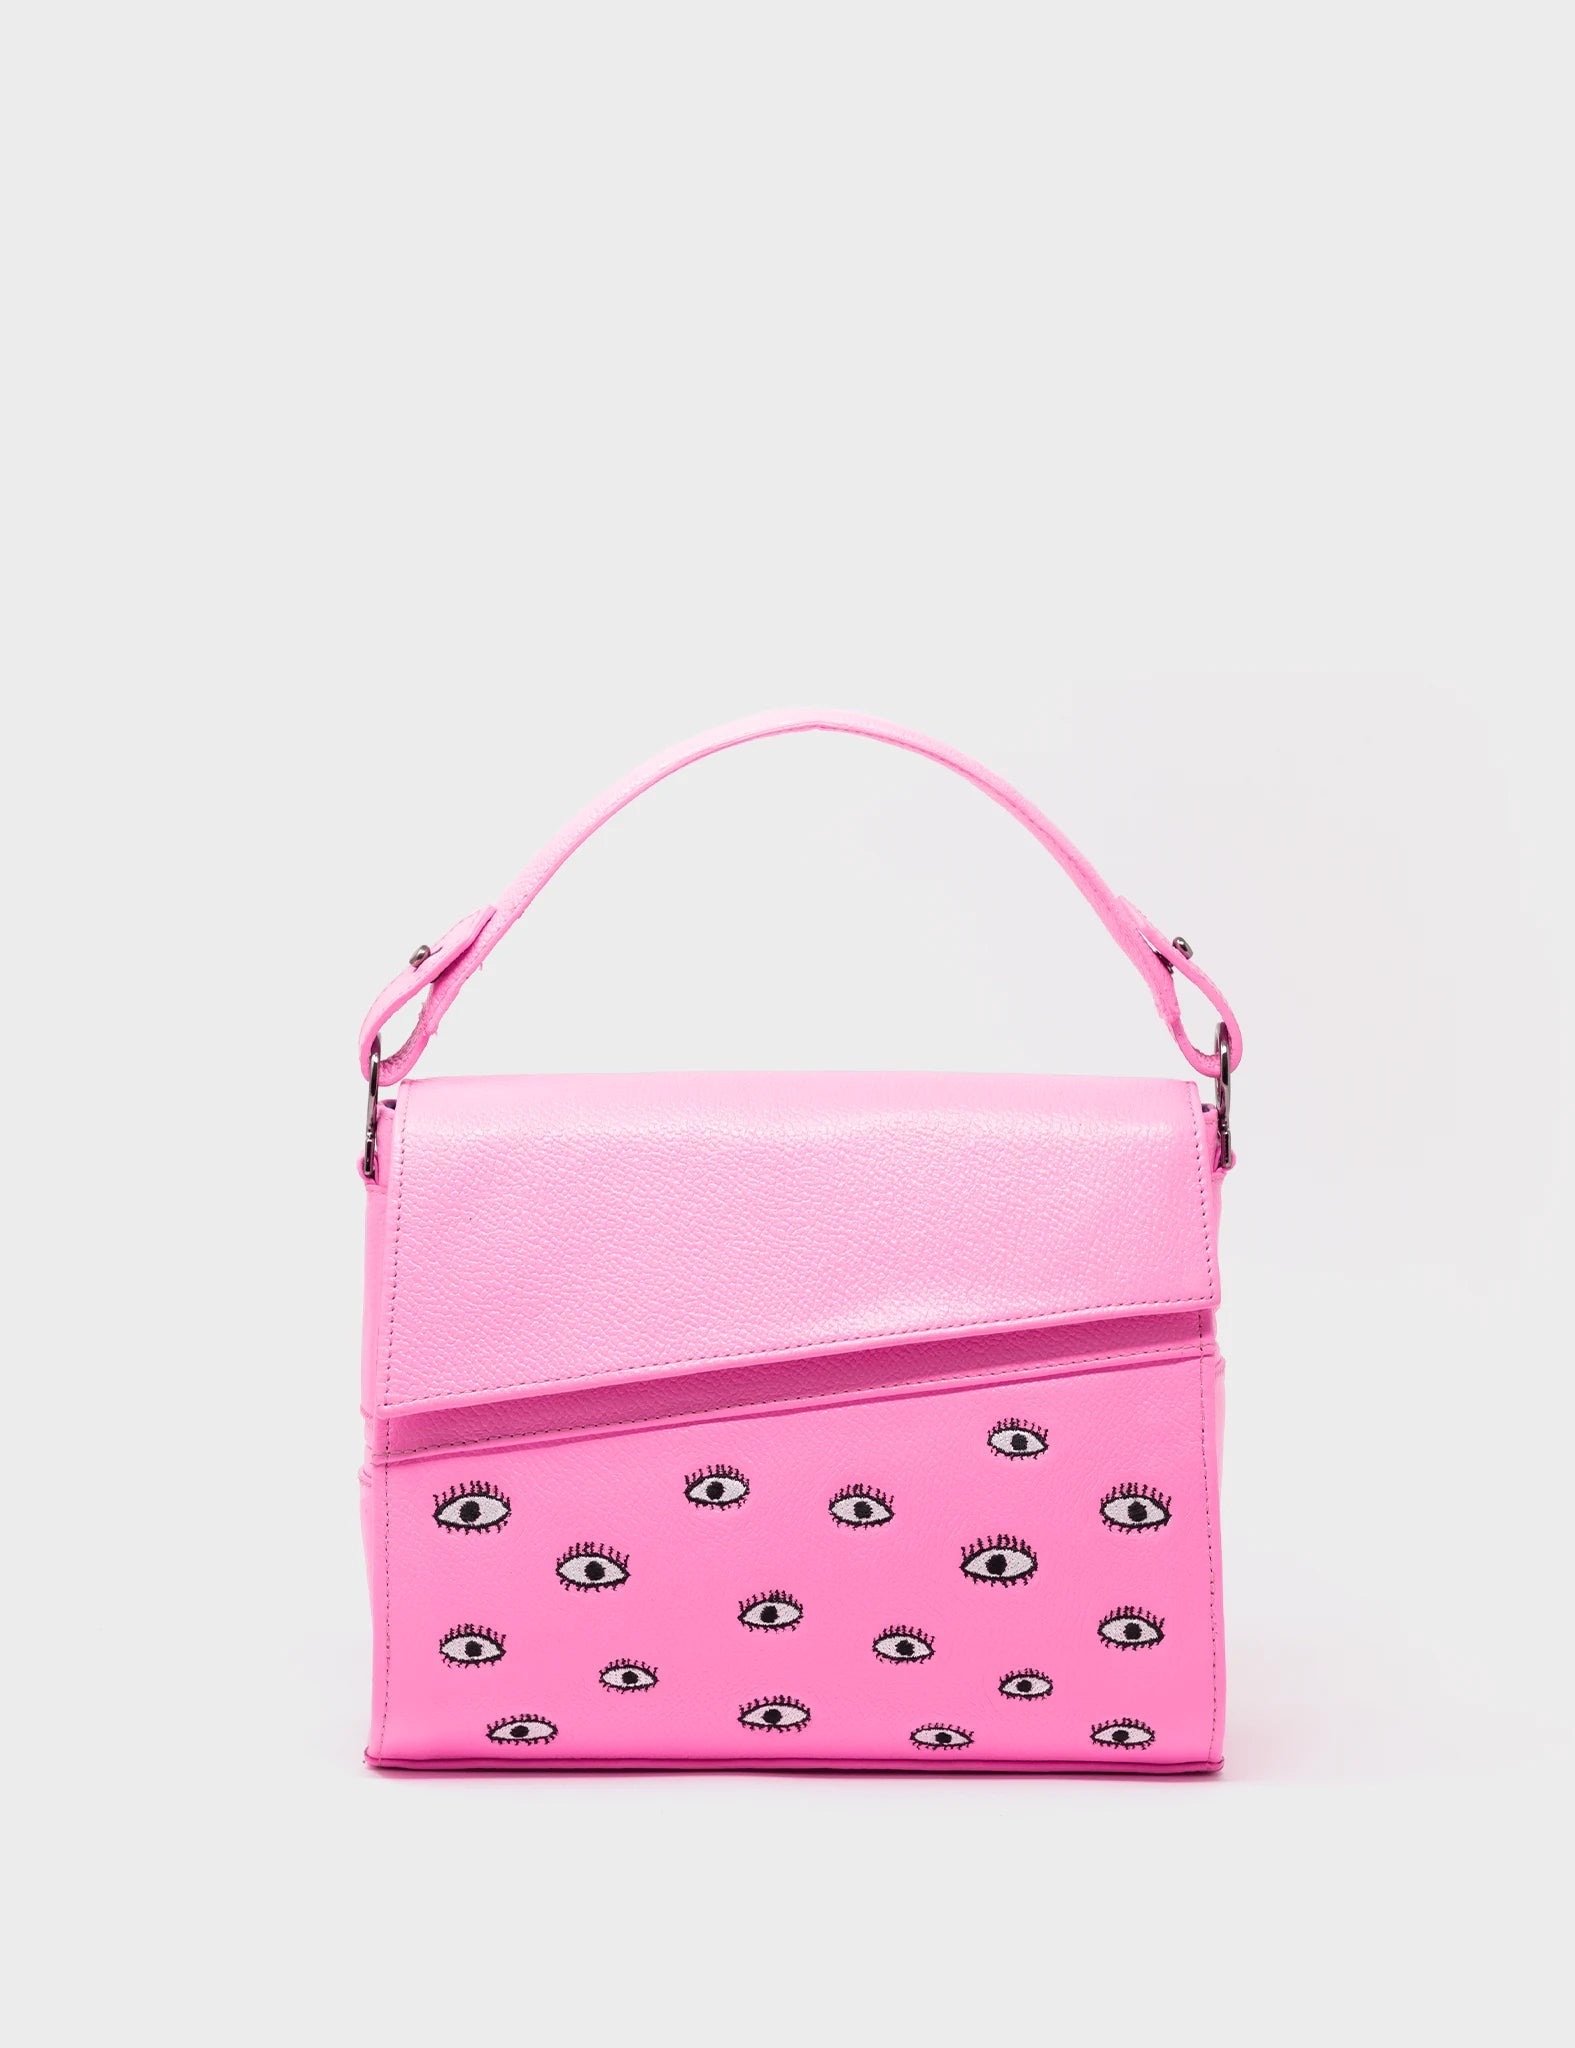 Frodo Wallet - Bubblegum Pink Leather All Over Eyes Embroidery – Min & Mon